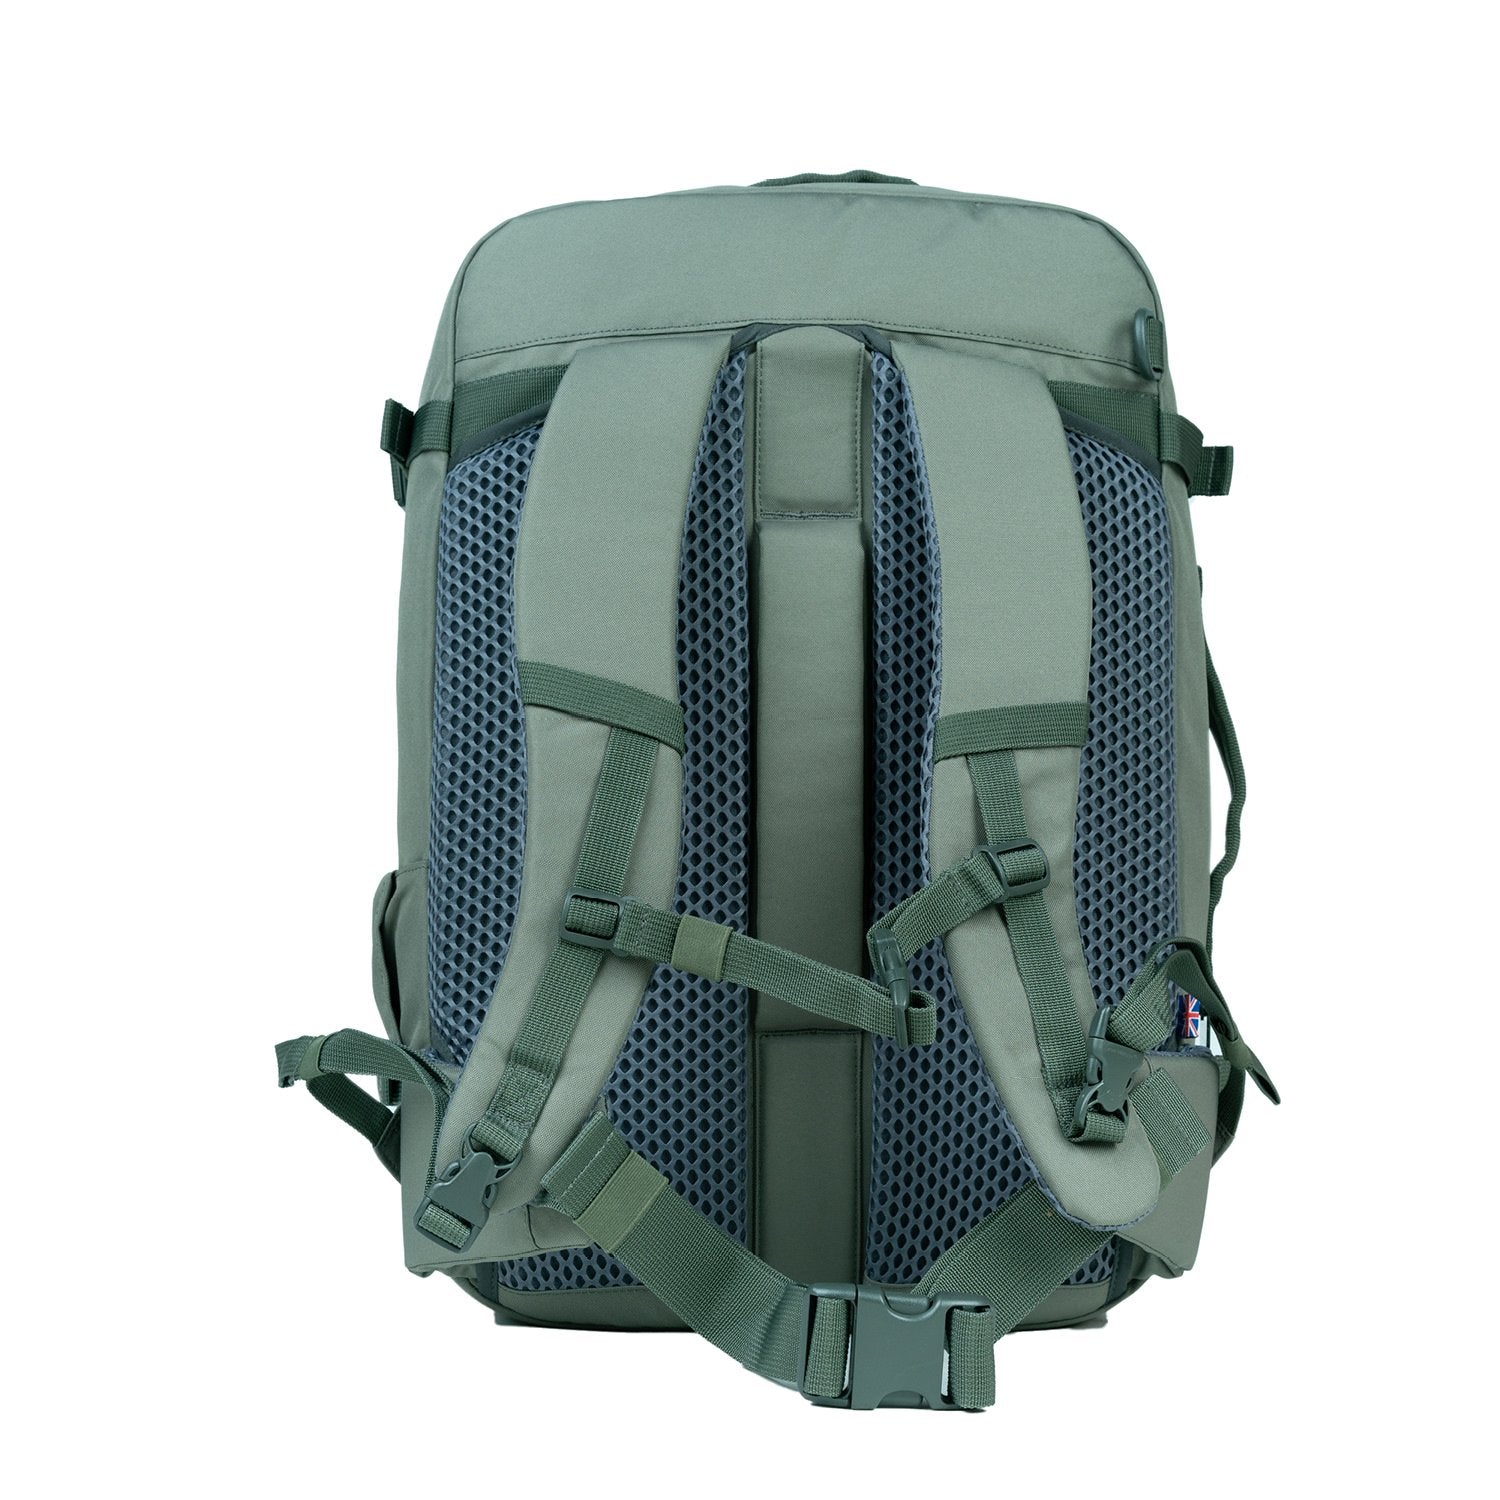 Cabin Zero Travel Backpack Review